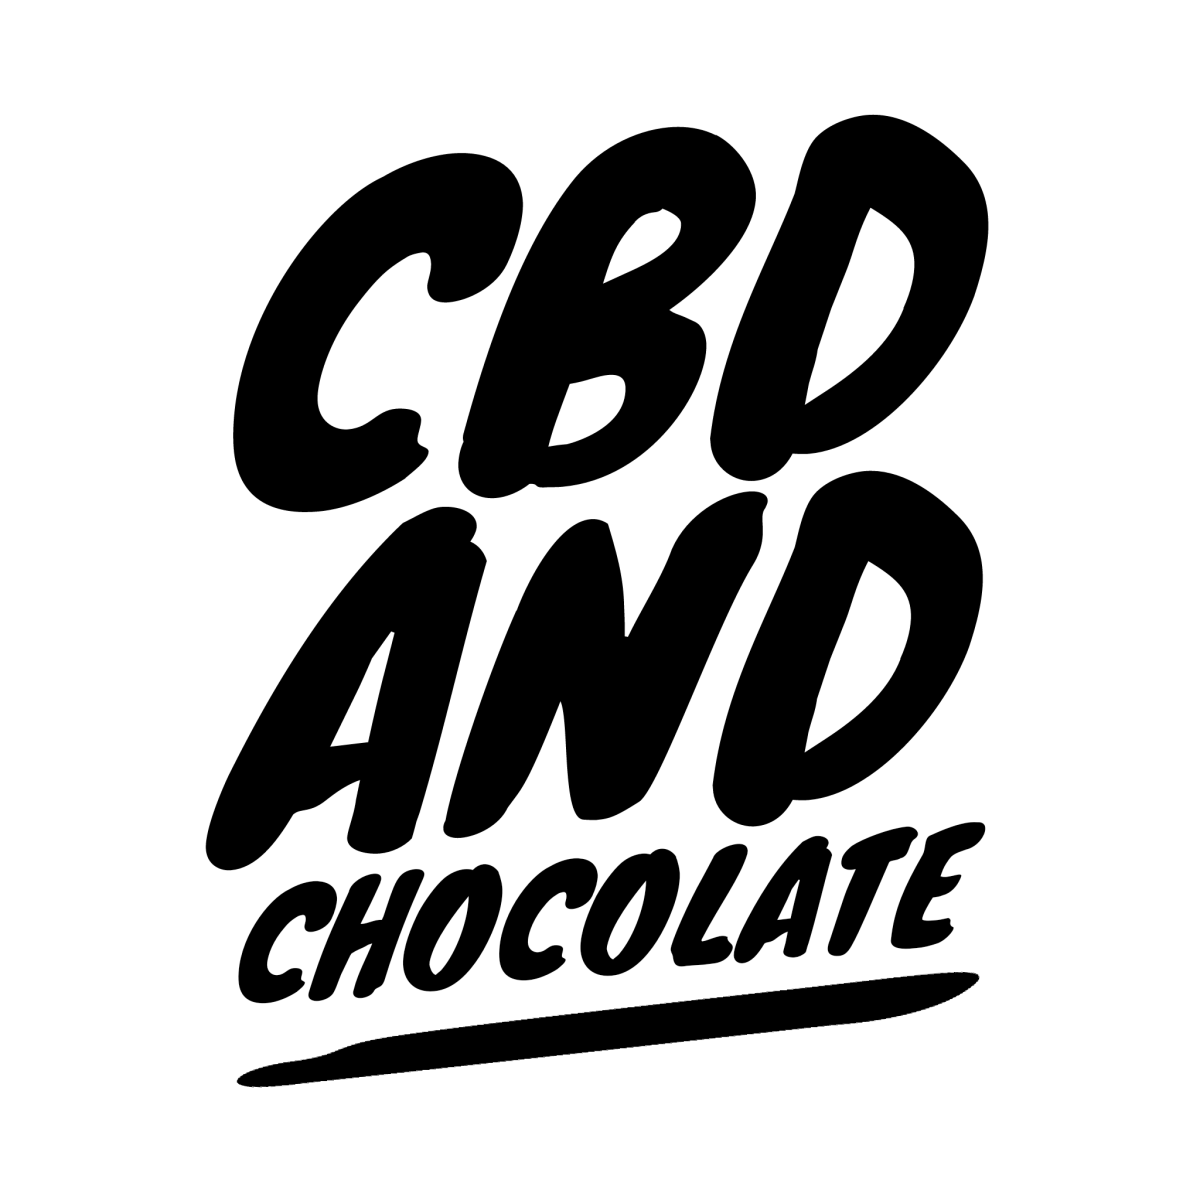 CBD and Chocolate. What a Combo